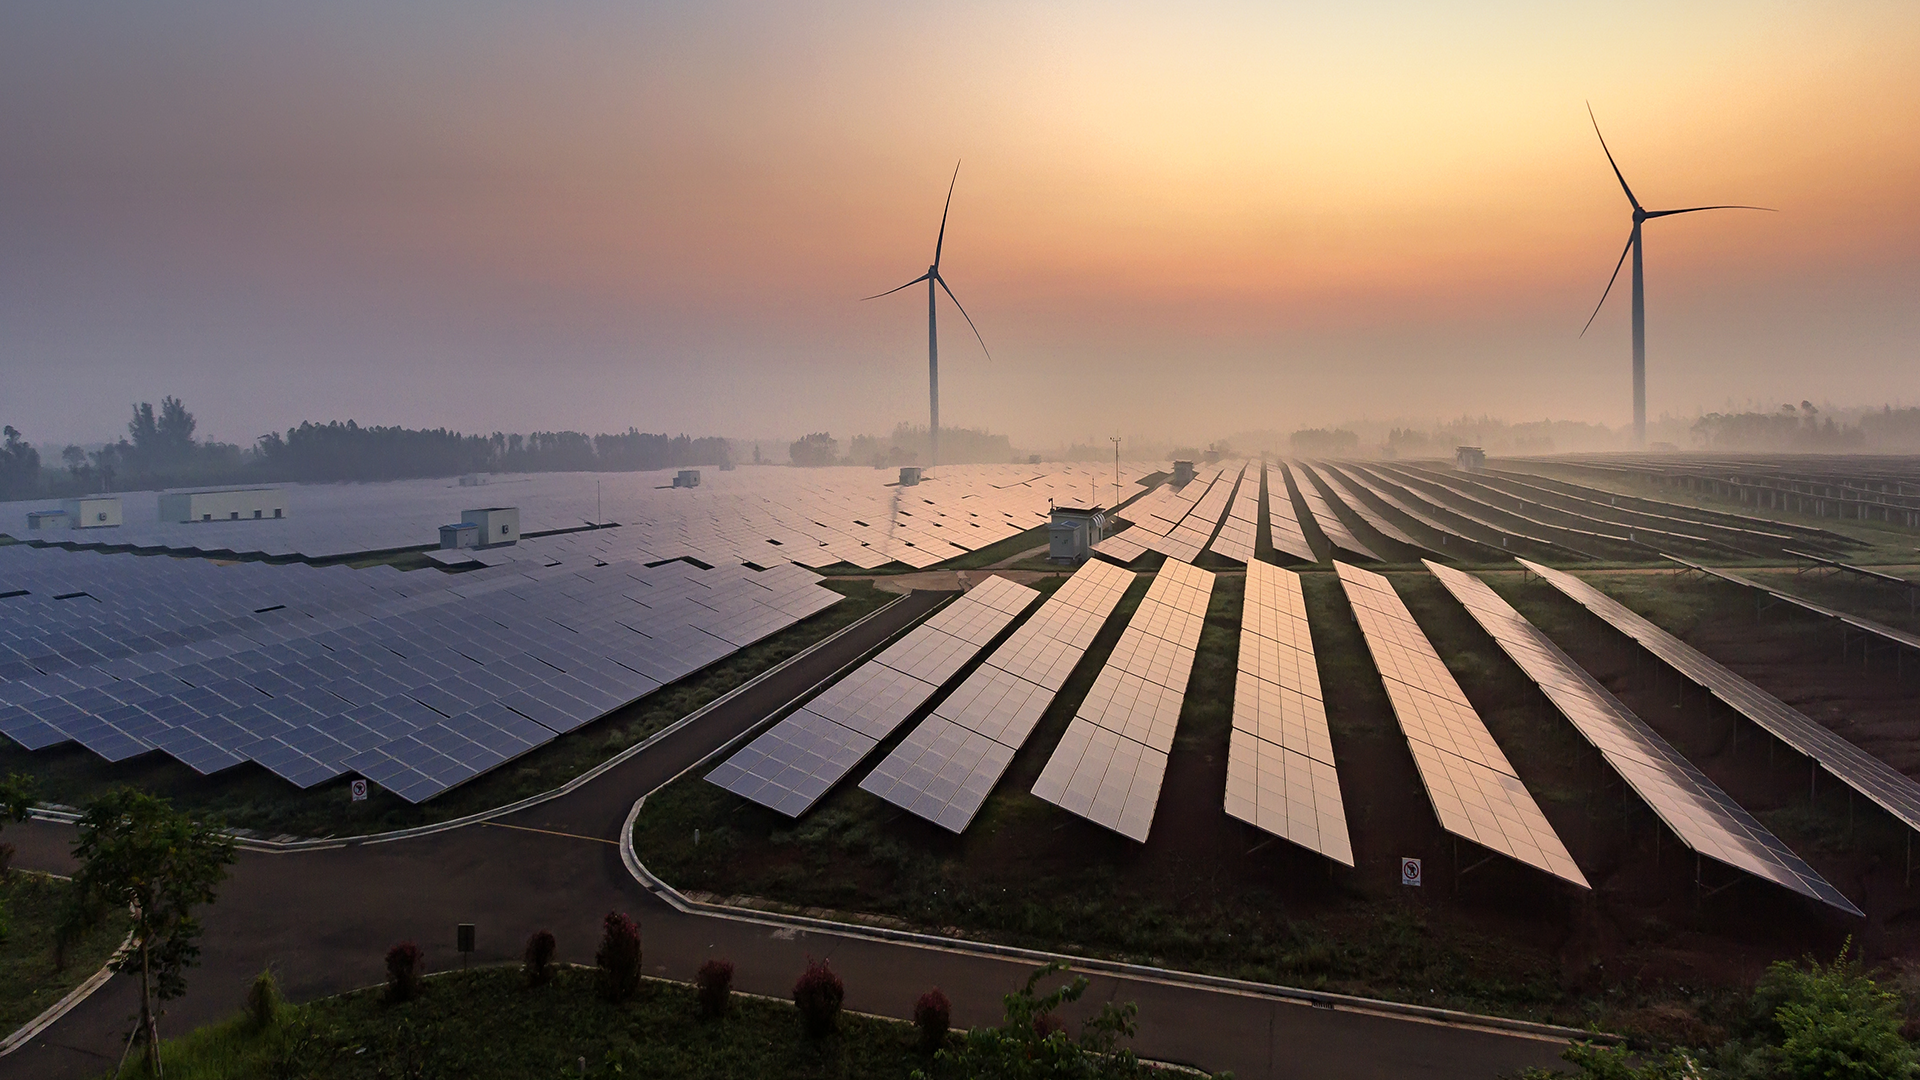 A field of various renewable energy technologies, including solar panels, battery storage, and wind energy.